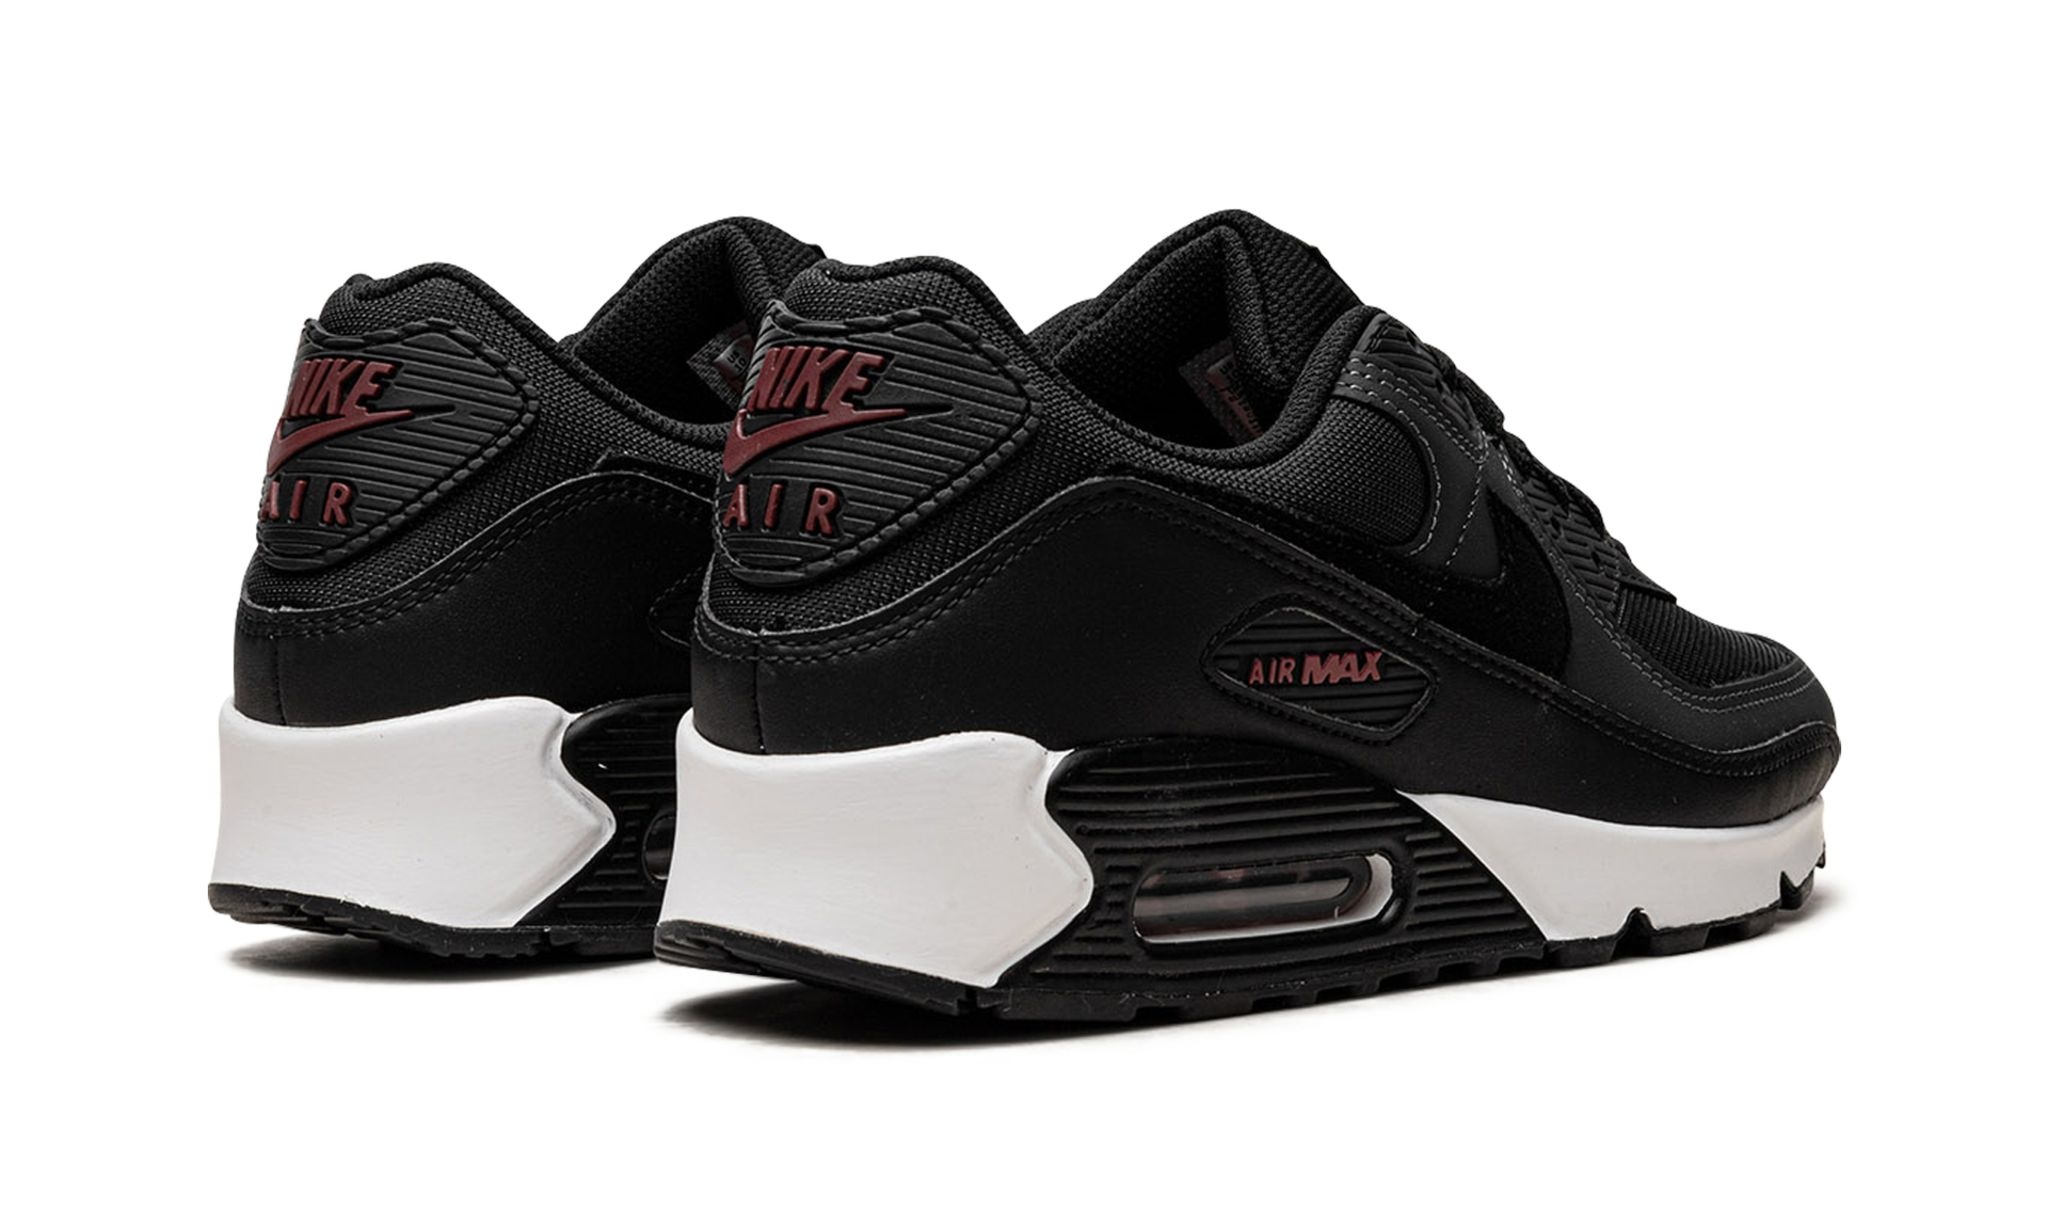 Air Max 90 "Anthracite Team Red" - 3